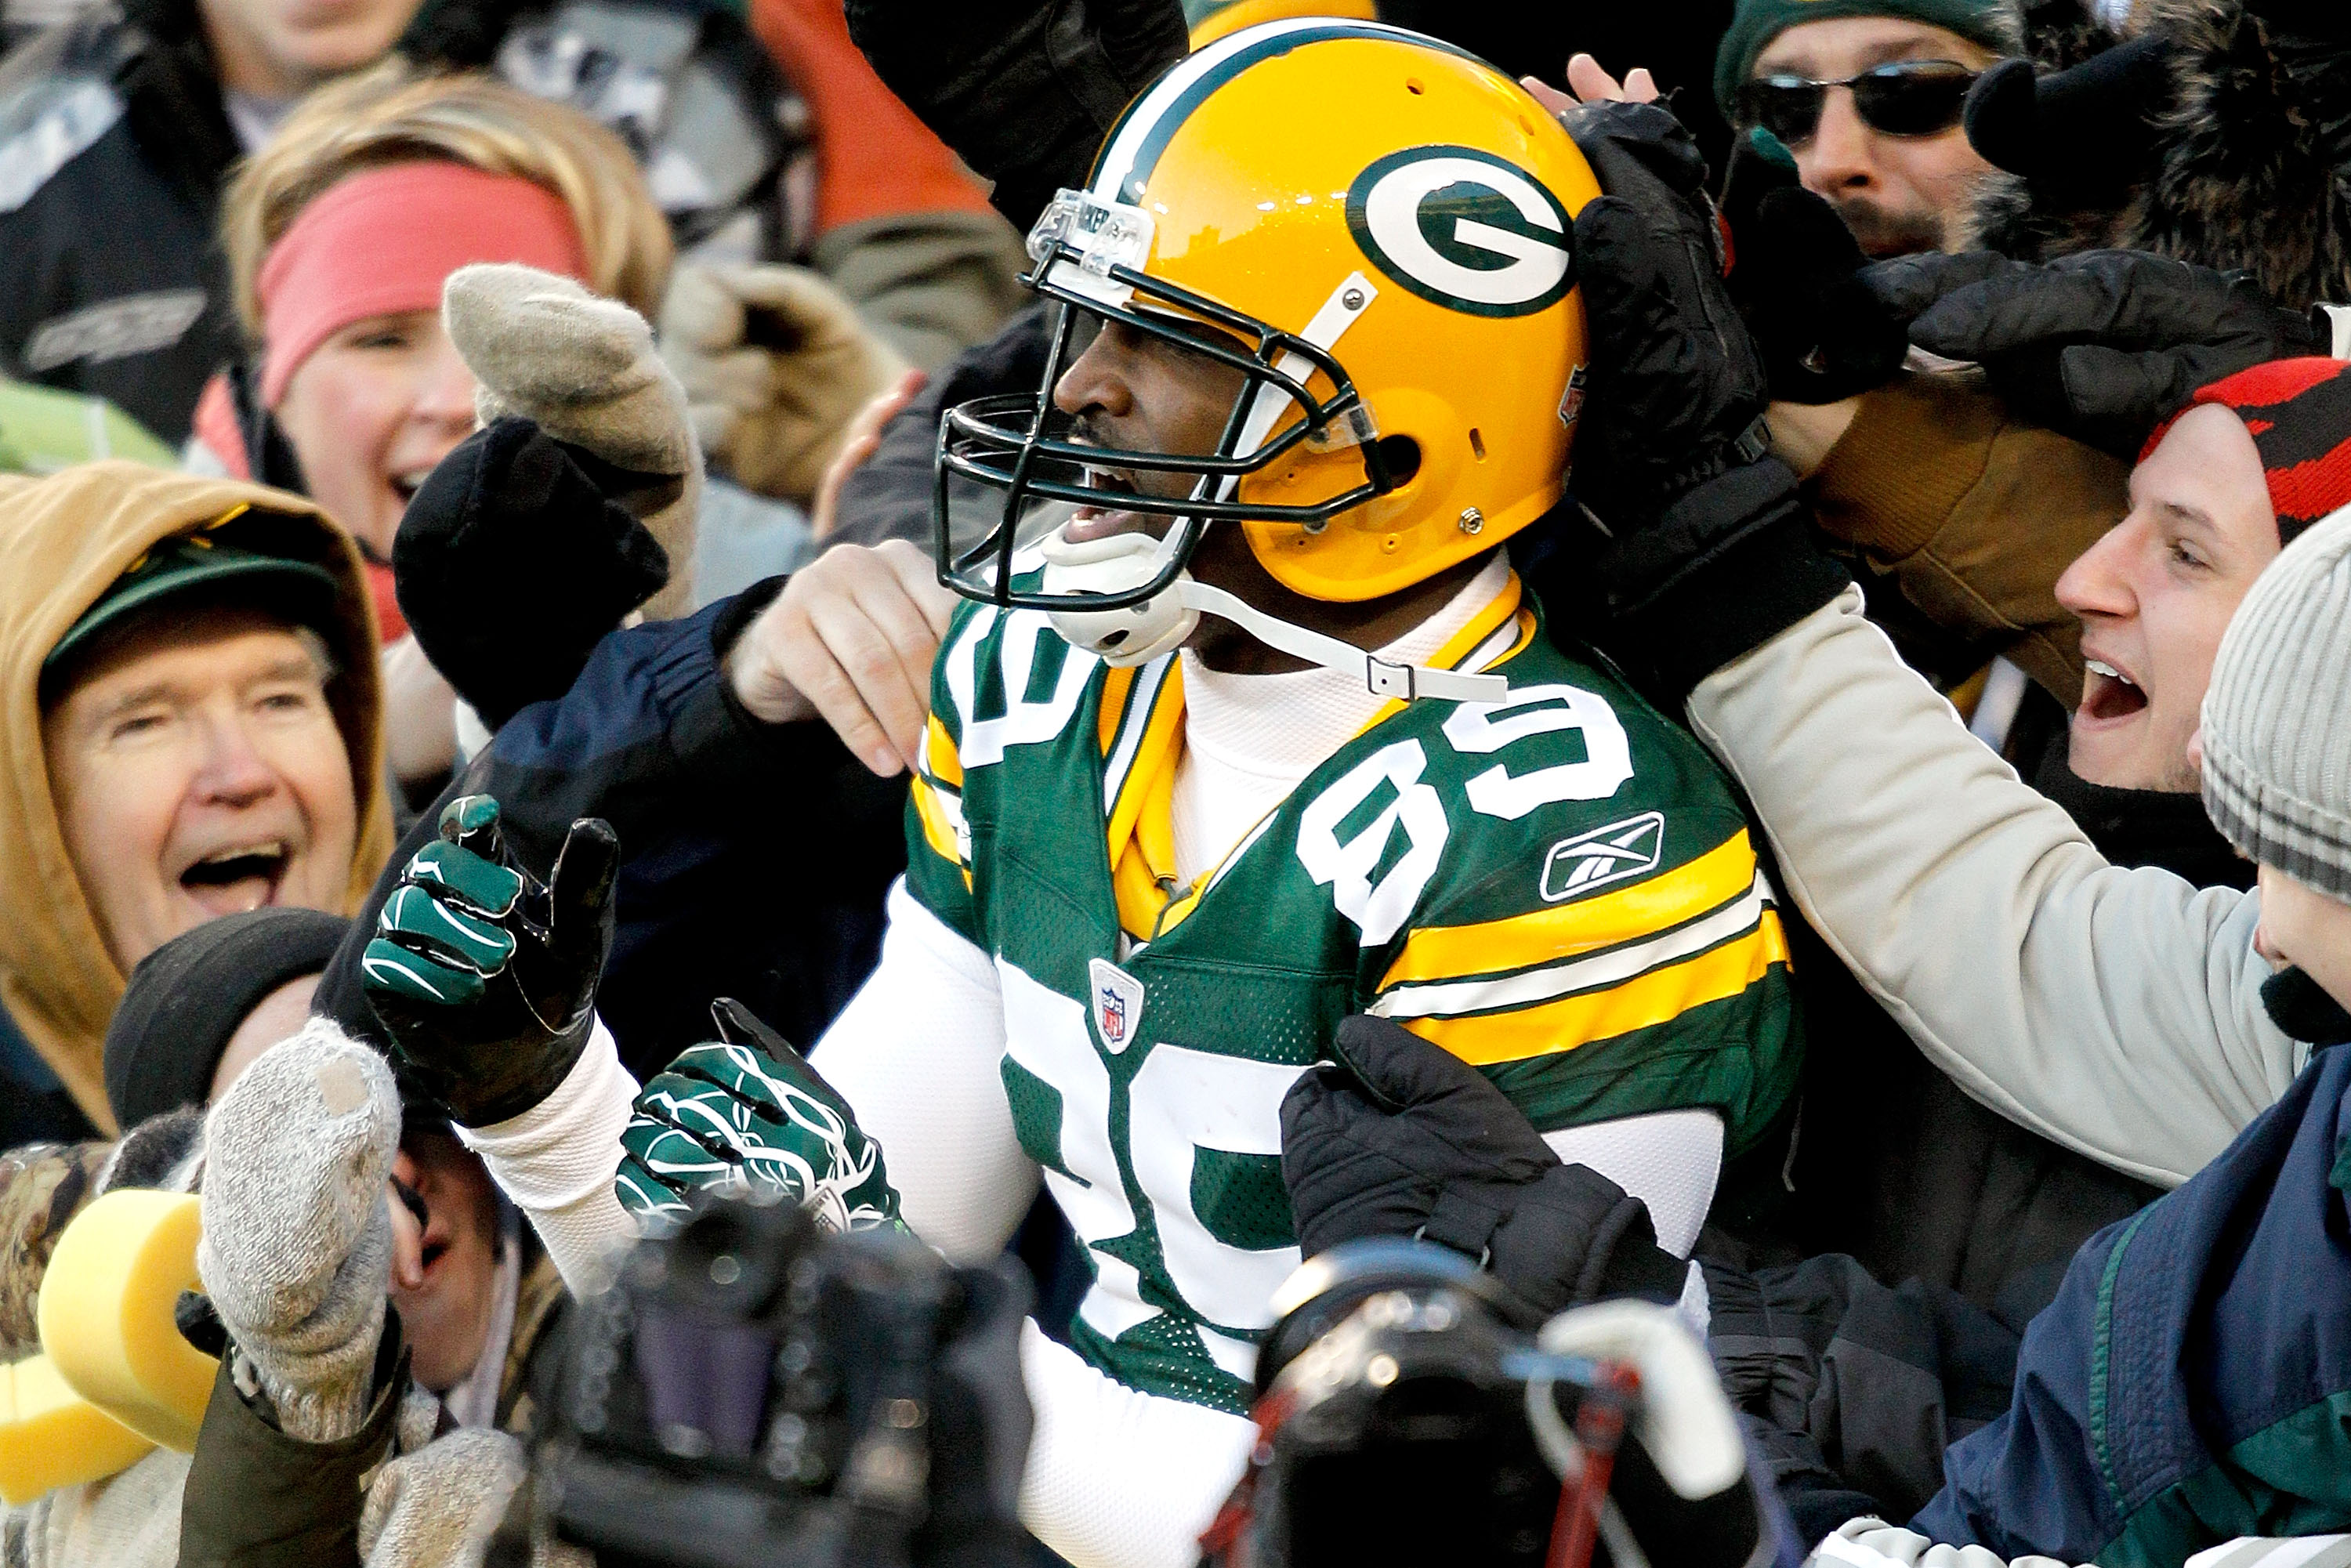 GREEN BAY, WI - DECEMBER 26:  James Jones #89 of the Green Bay Packers leaps into the stands after scoring a touchdown against the New York Giants at Lambeau Field on December 26, 2010 in Green Bay, Wisconsin.  (Photo by Matthew Stockman/Getty Images)